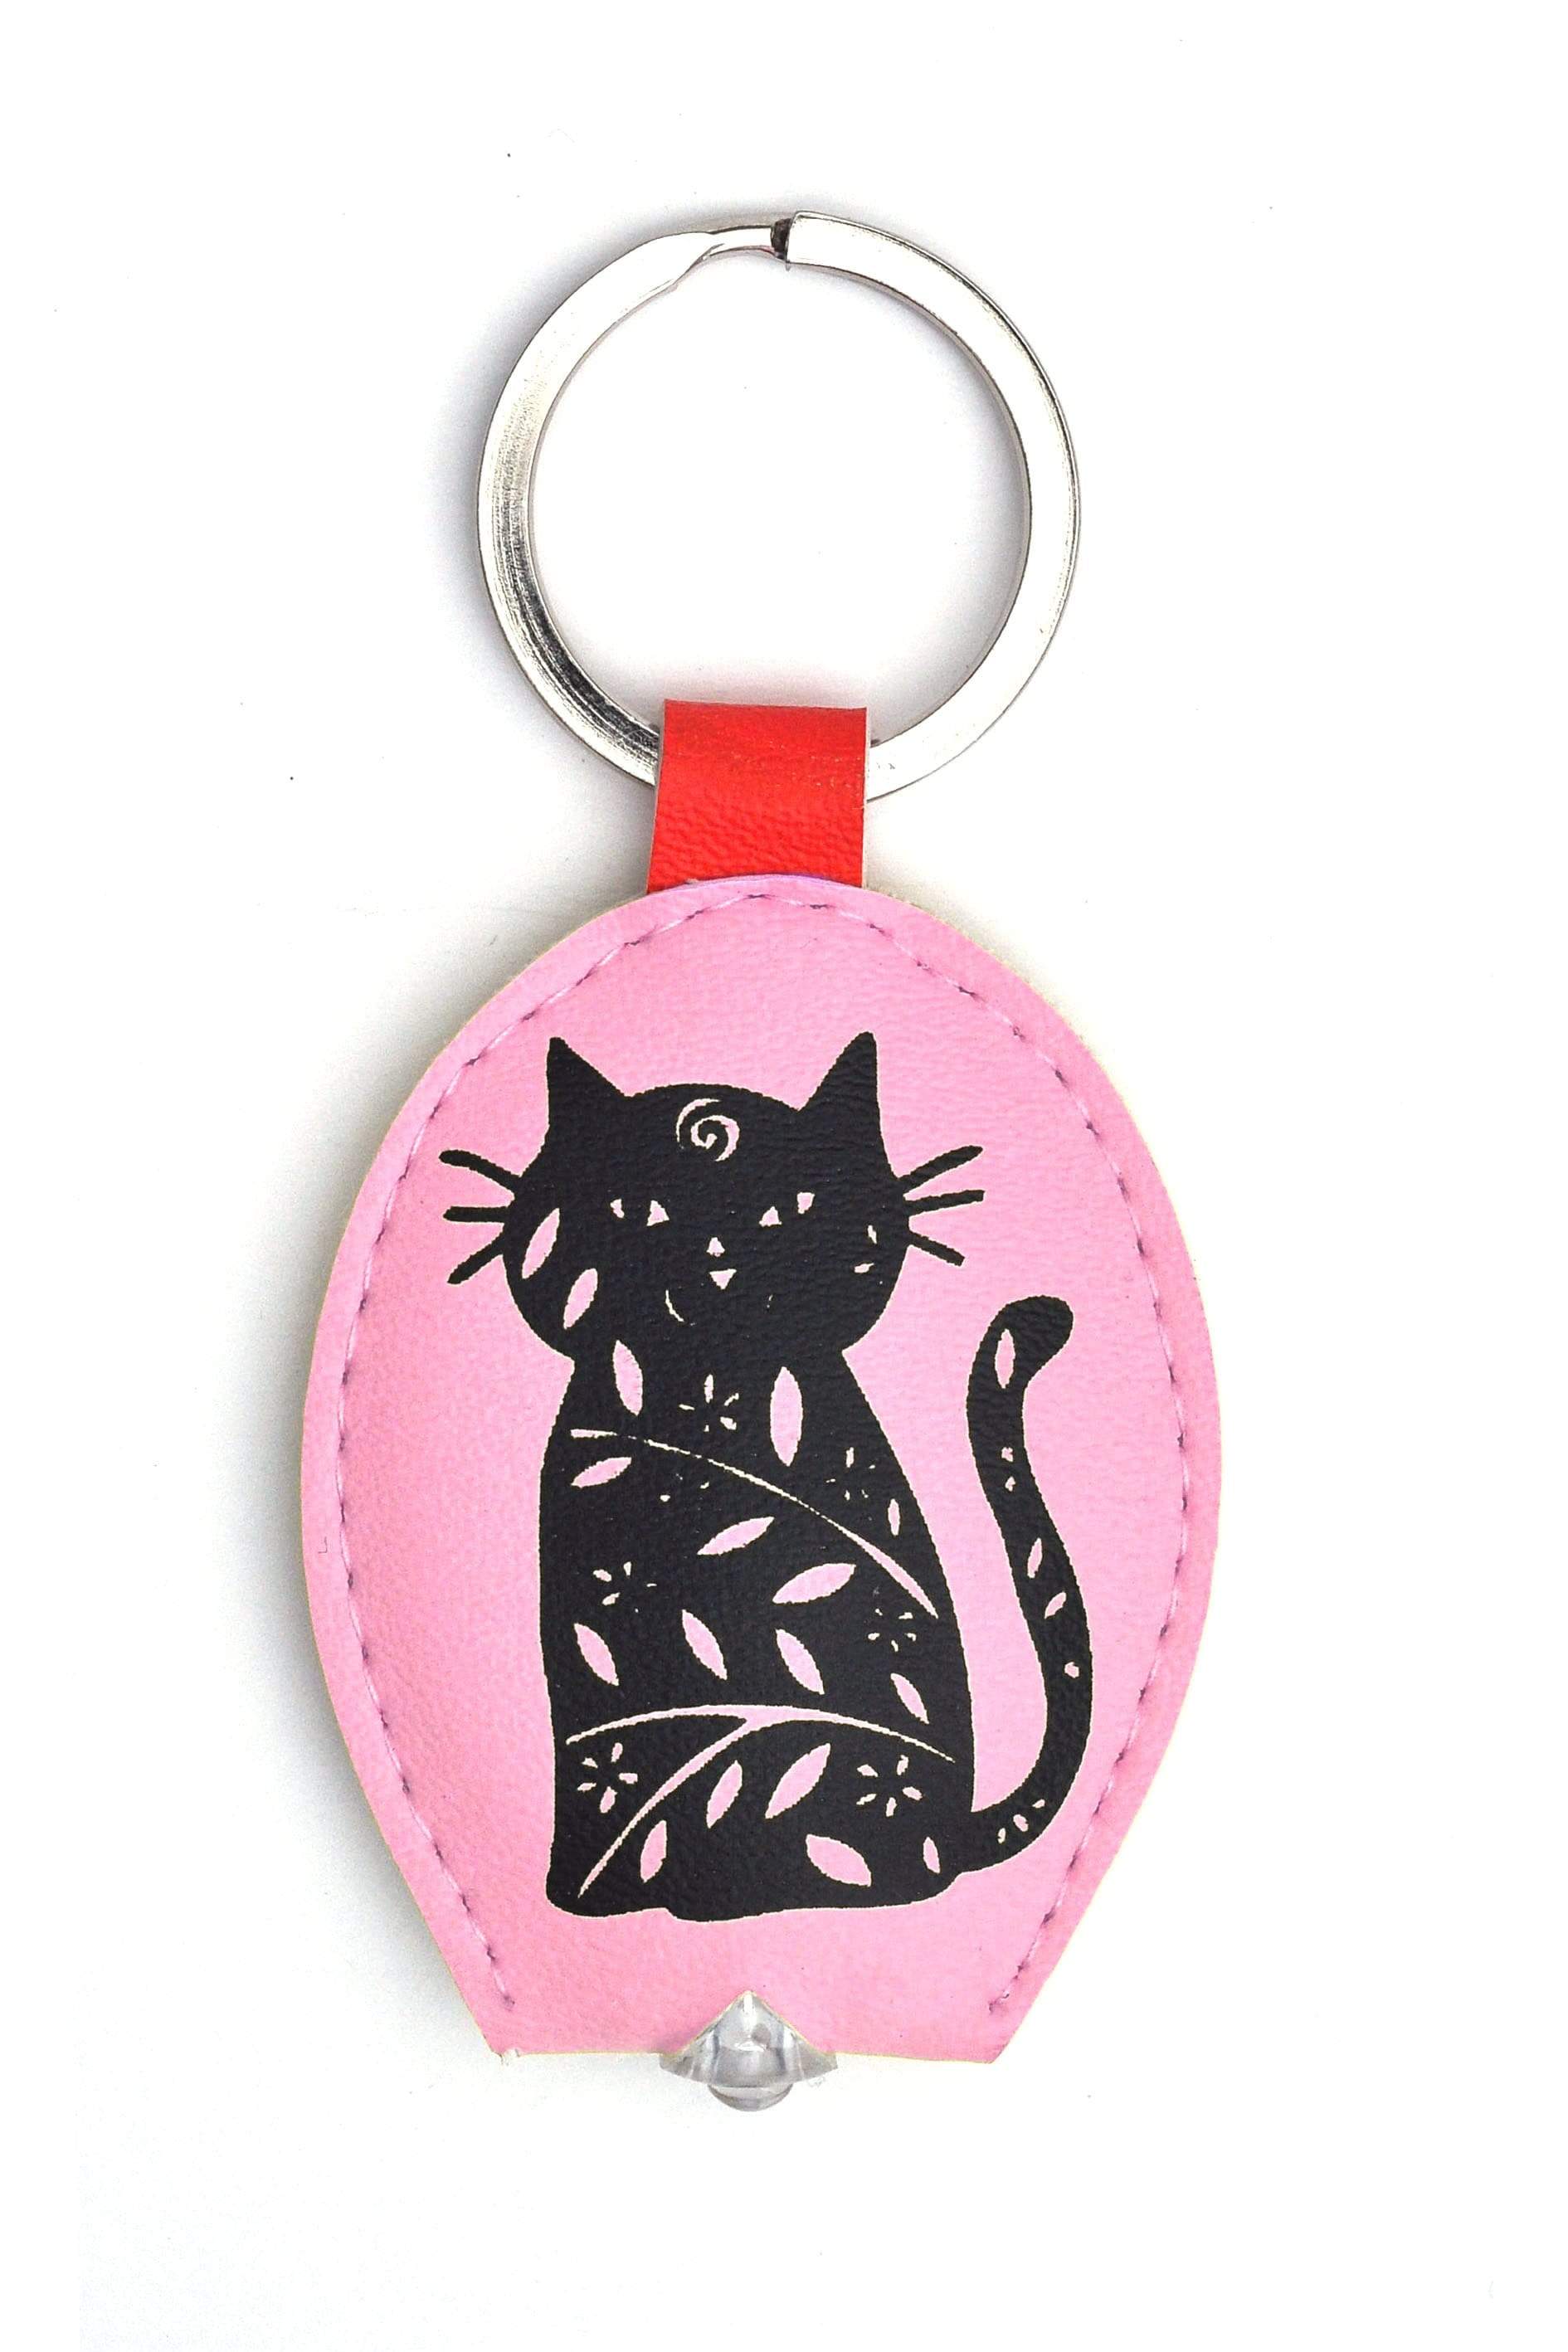 Curios Gifts Keyring Slogans Keylight - Keyring with Built-in LED Torch - Woodcut Cat